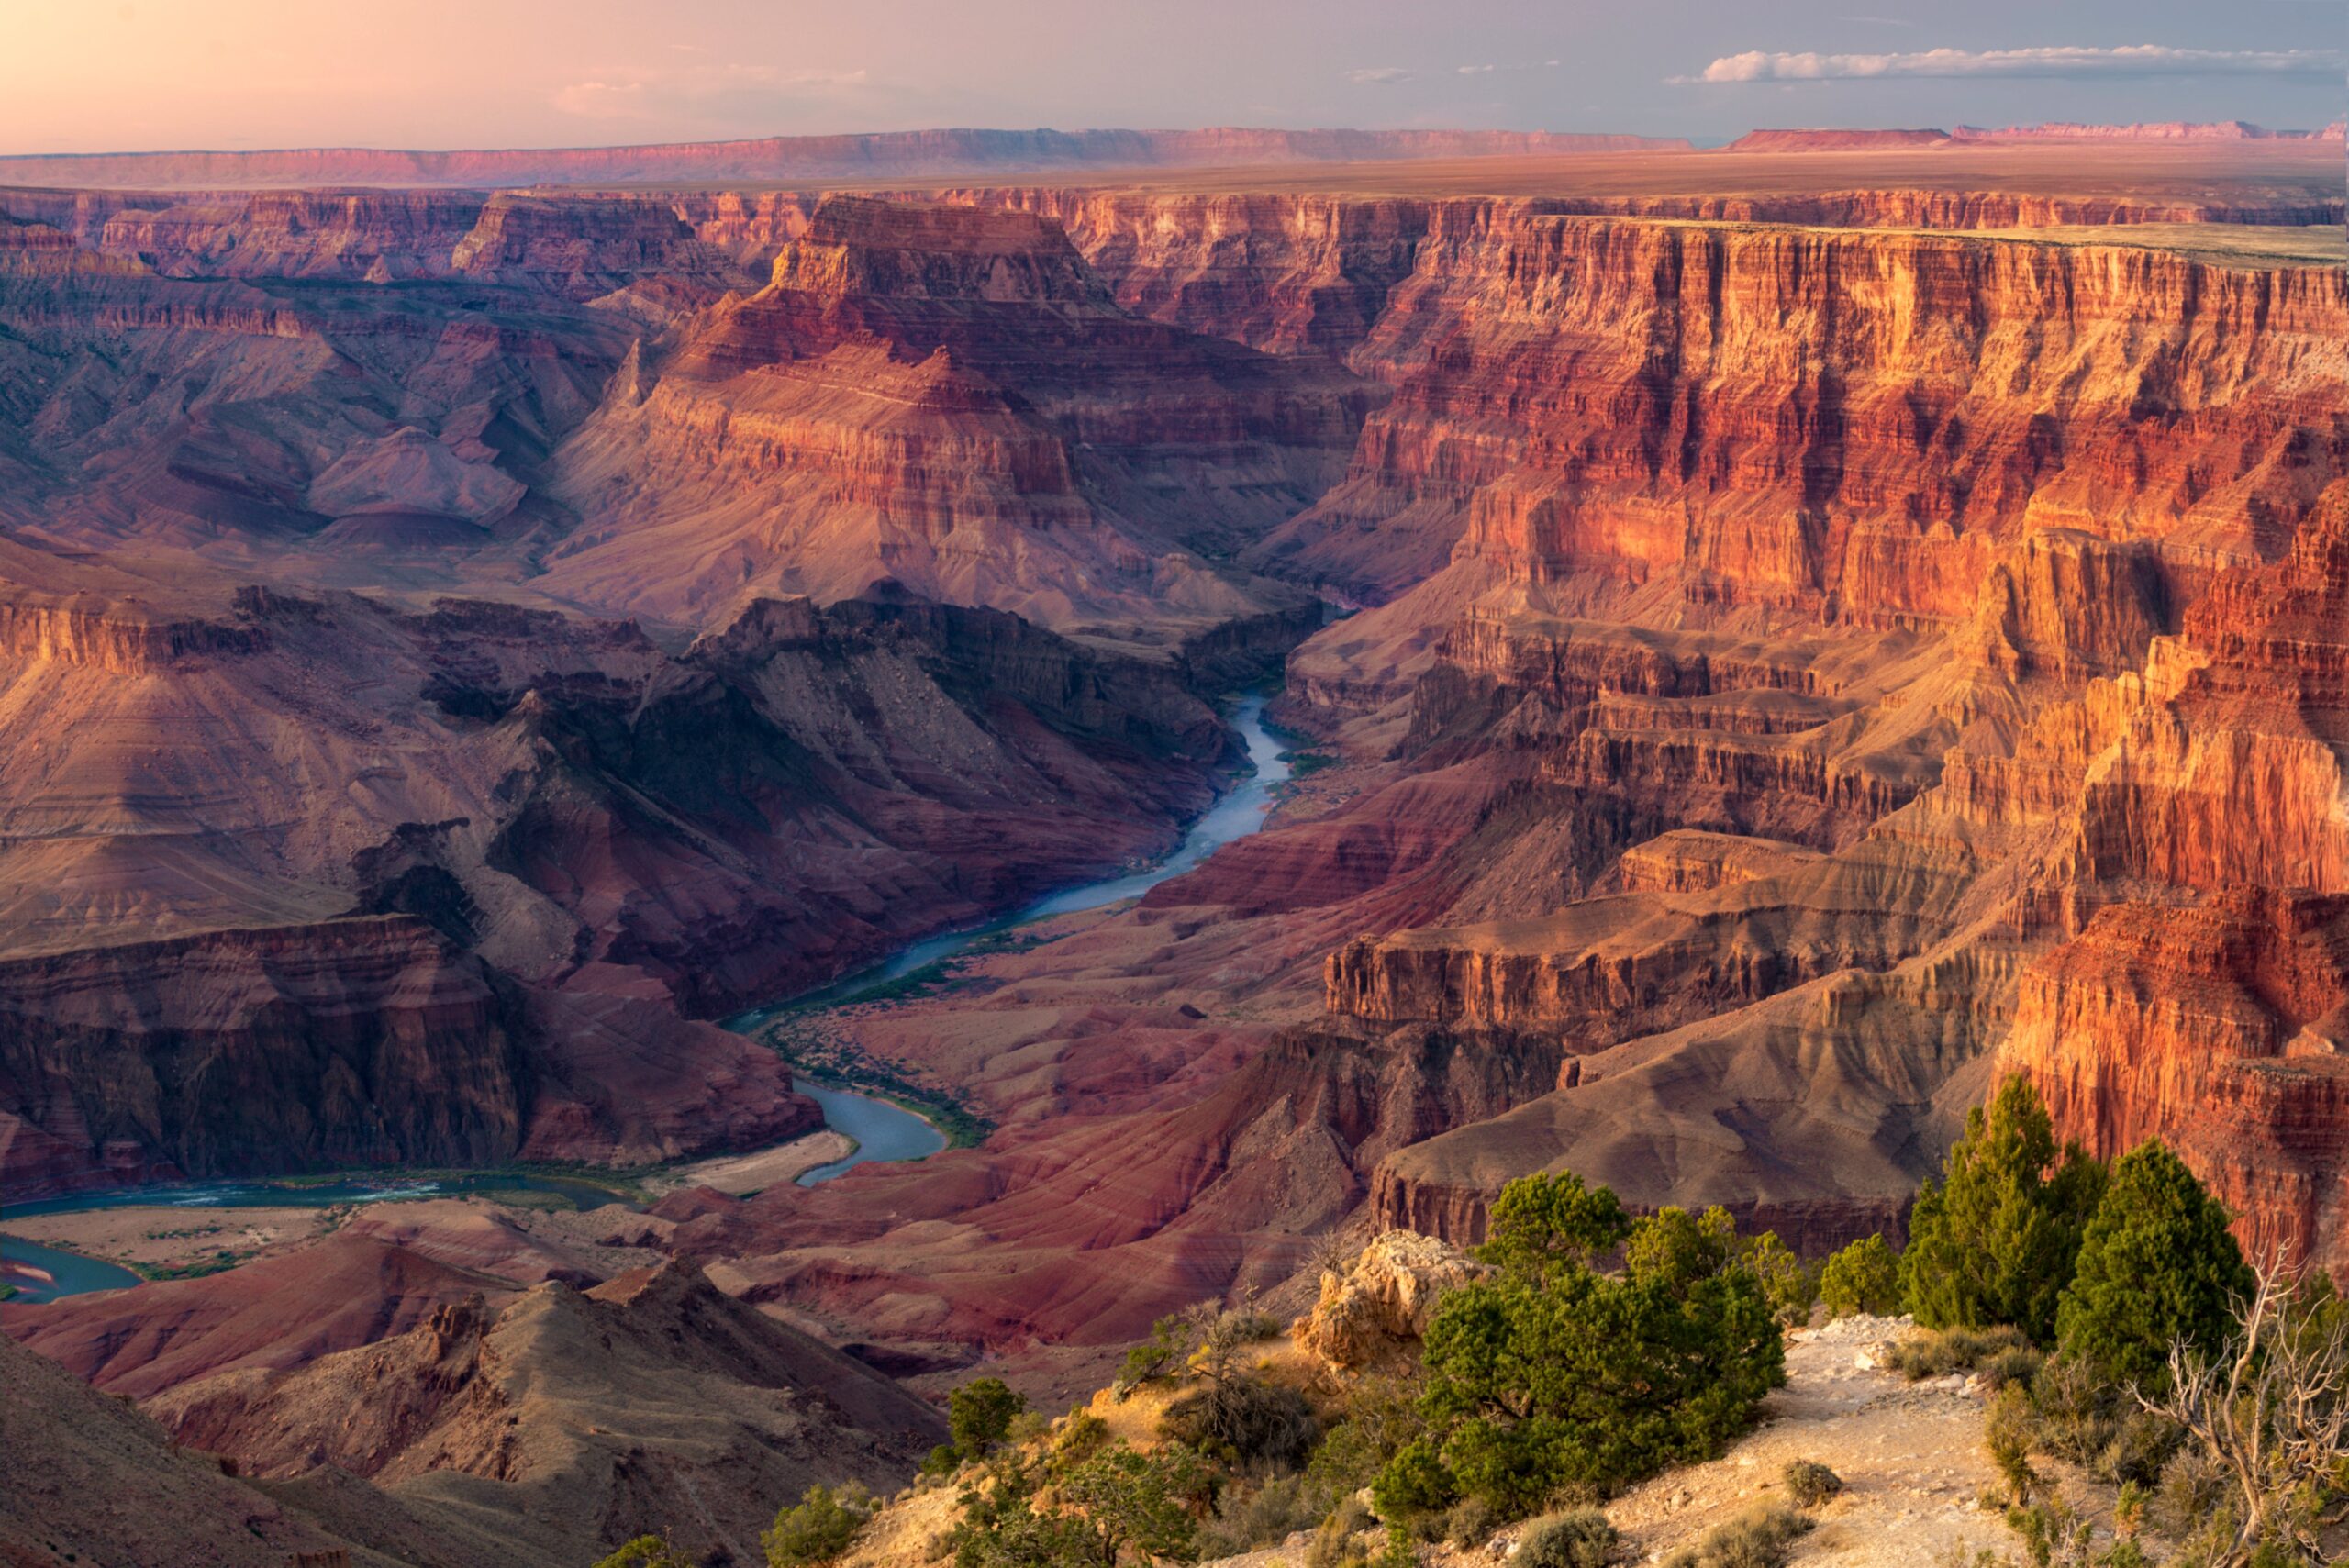 What to Wear Hiking the Grand Canyon